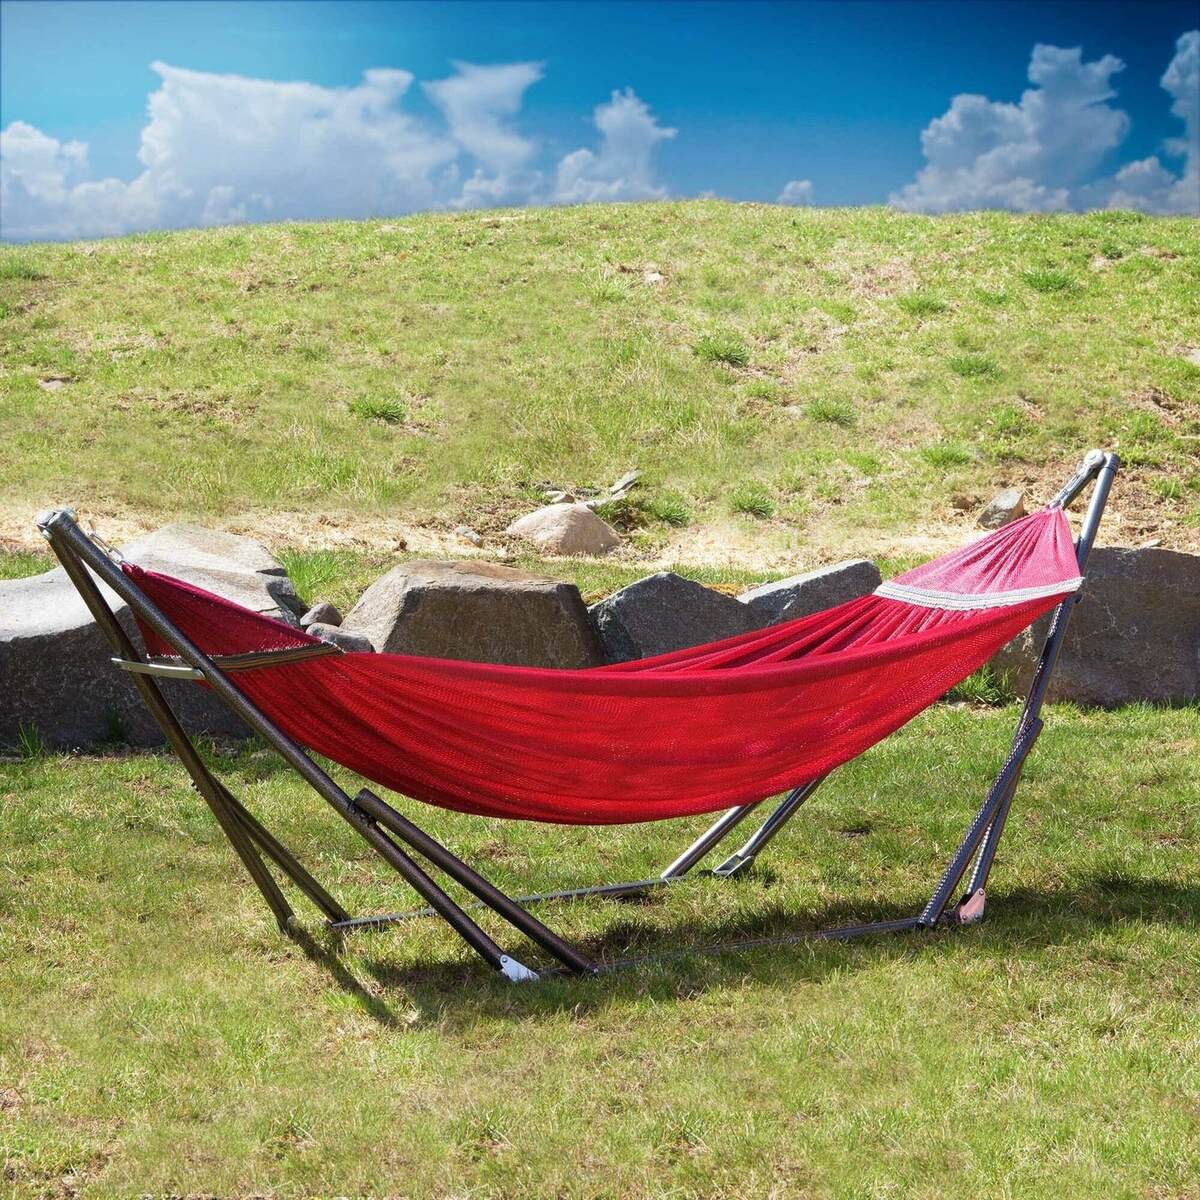 How To Choose A Hammock